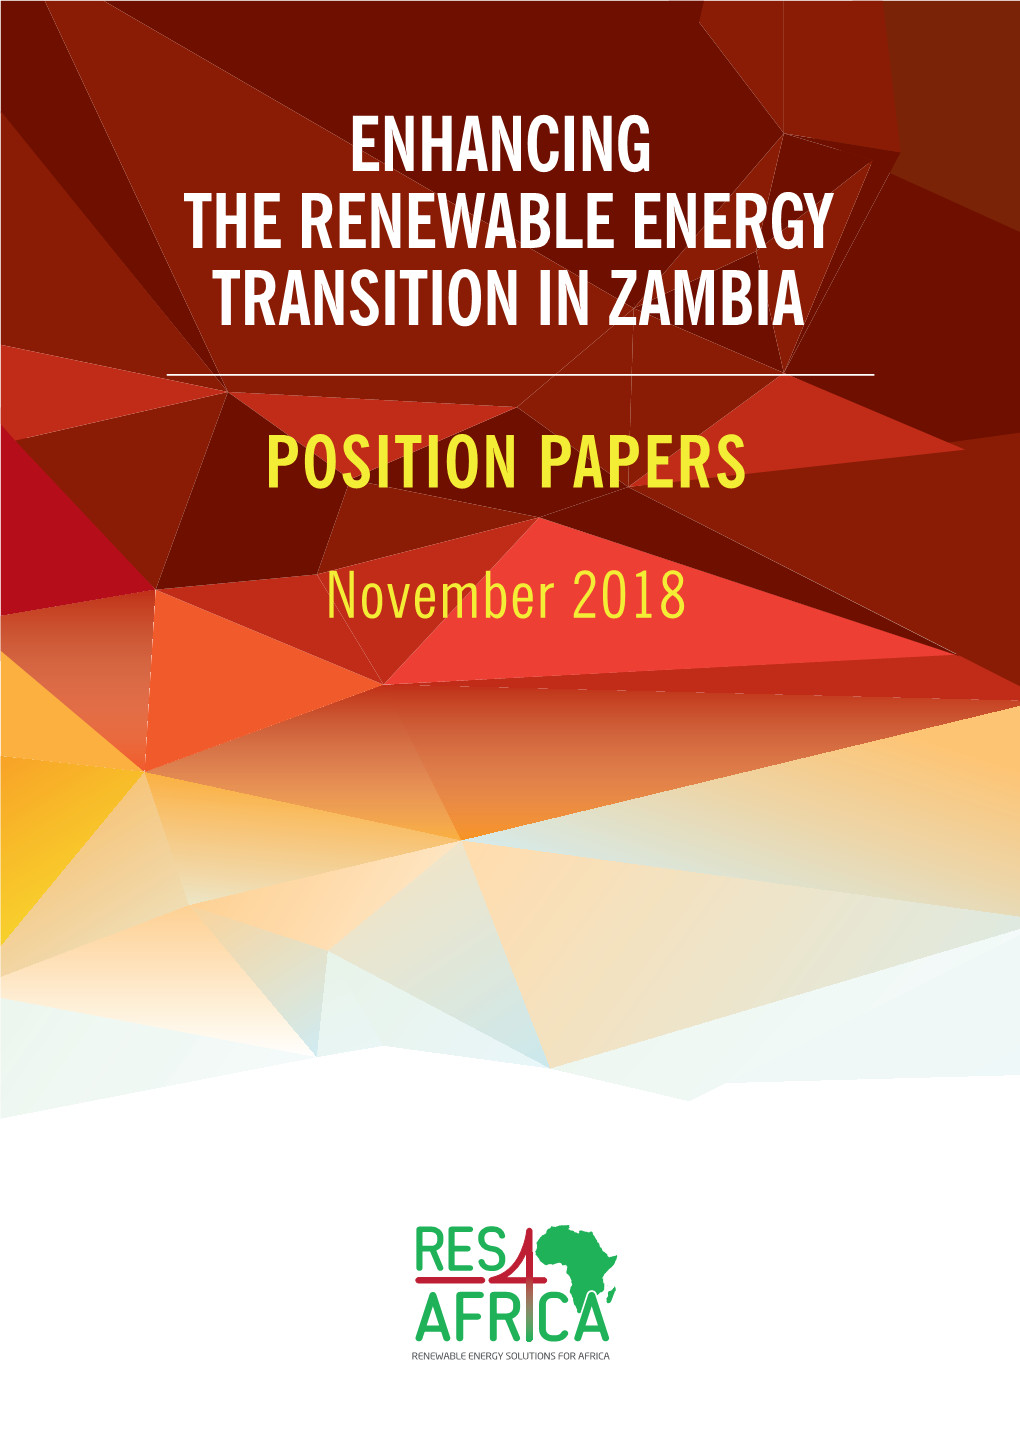 Enhancing the Renewable Energy Transition in Zambia